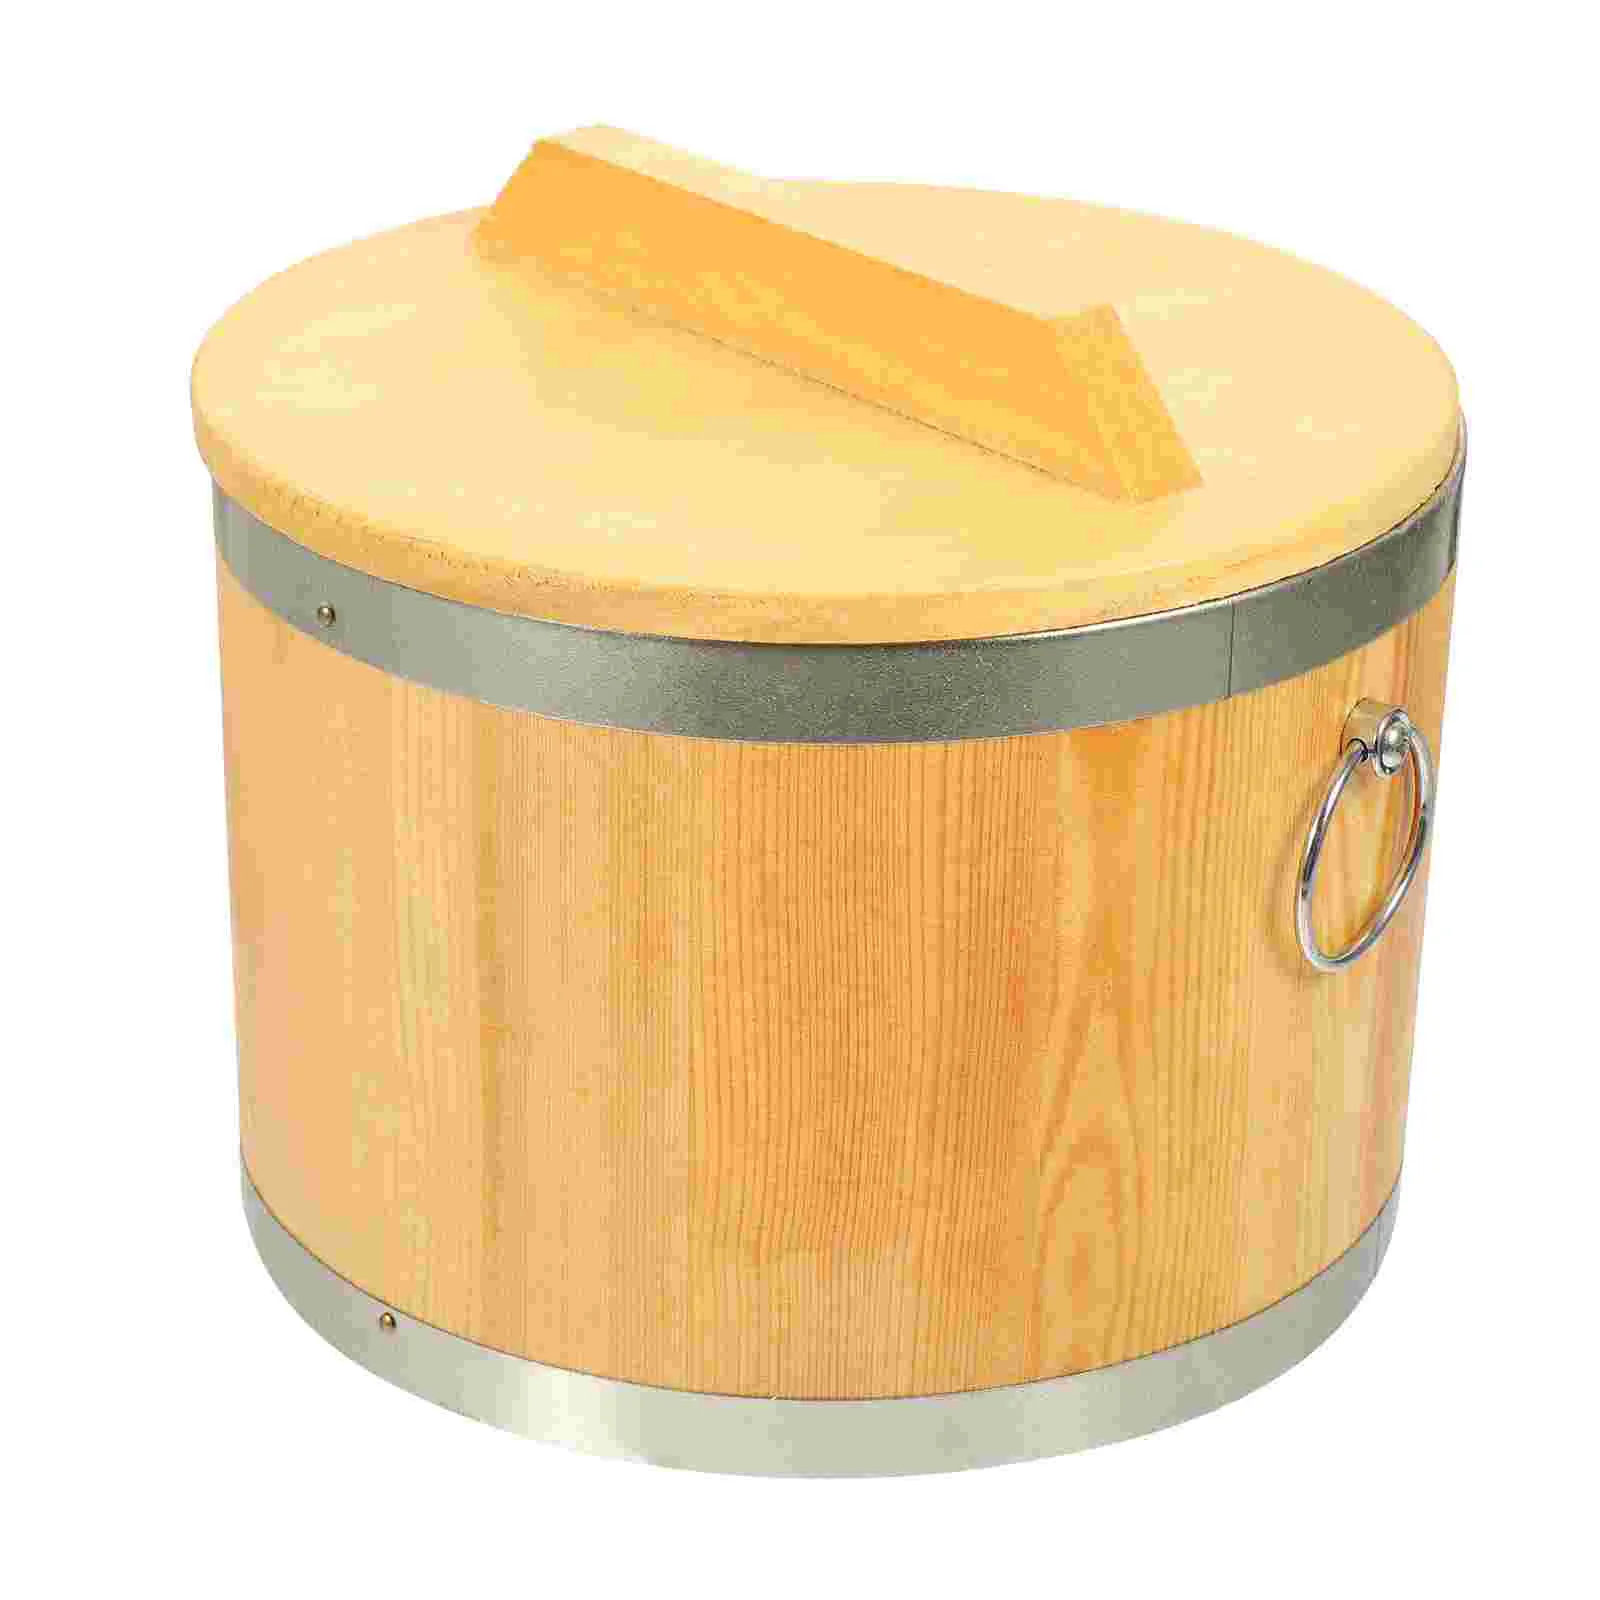 

Sushi Barrel Wooden Rice Cooked Holder Container Lidded Mixing Tub Serving Bucket Storage Bowl Beancurd Jelly Bread